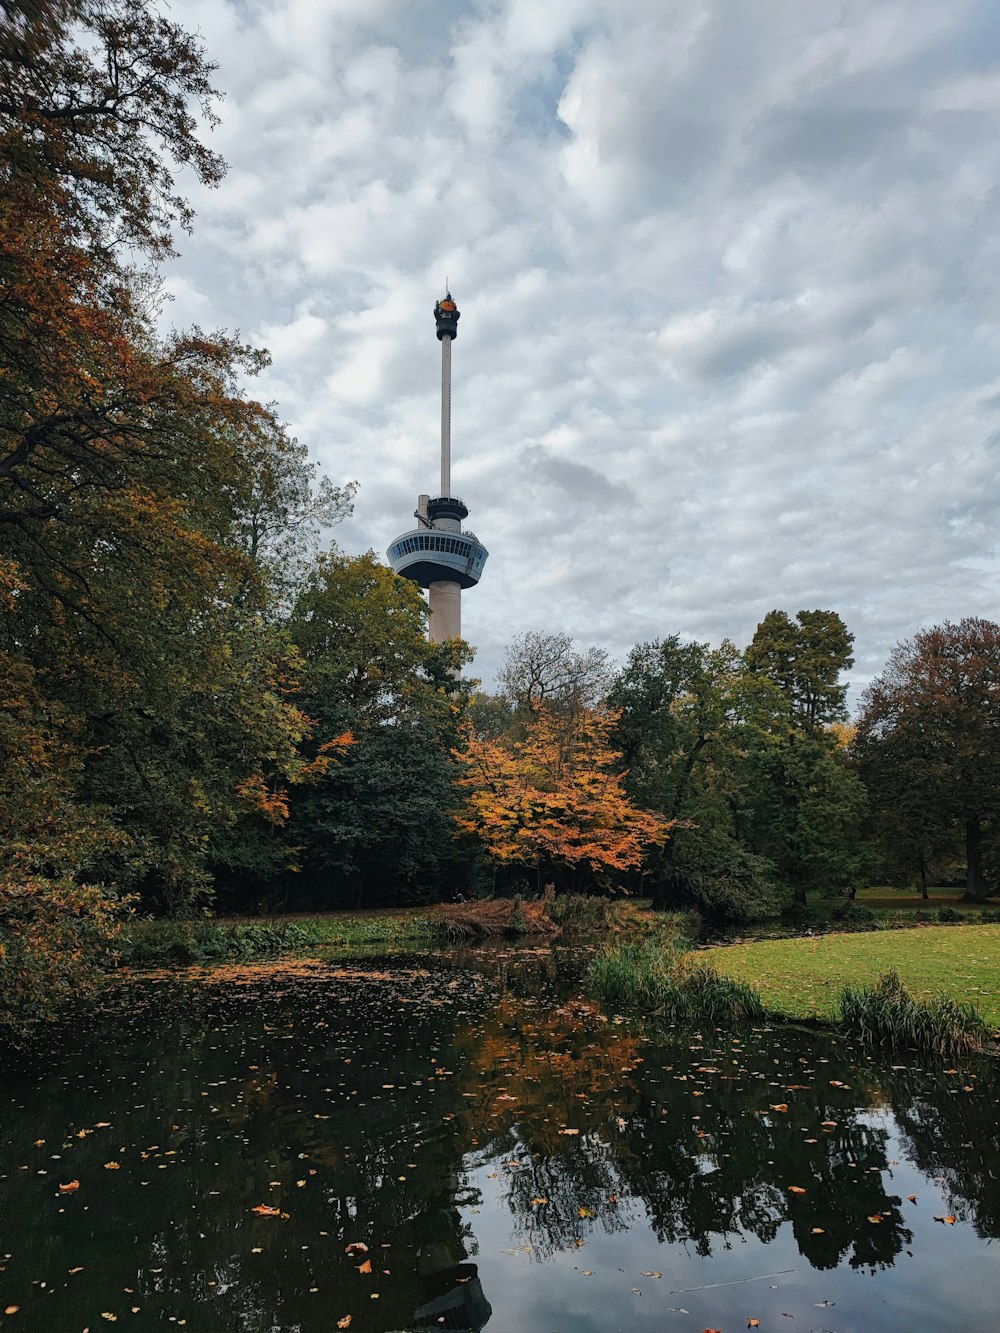 a pond in a park with a tower in the background